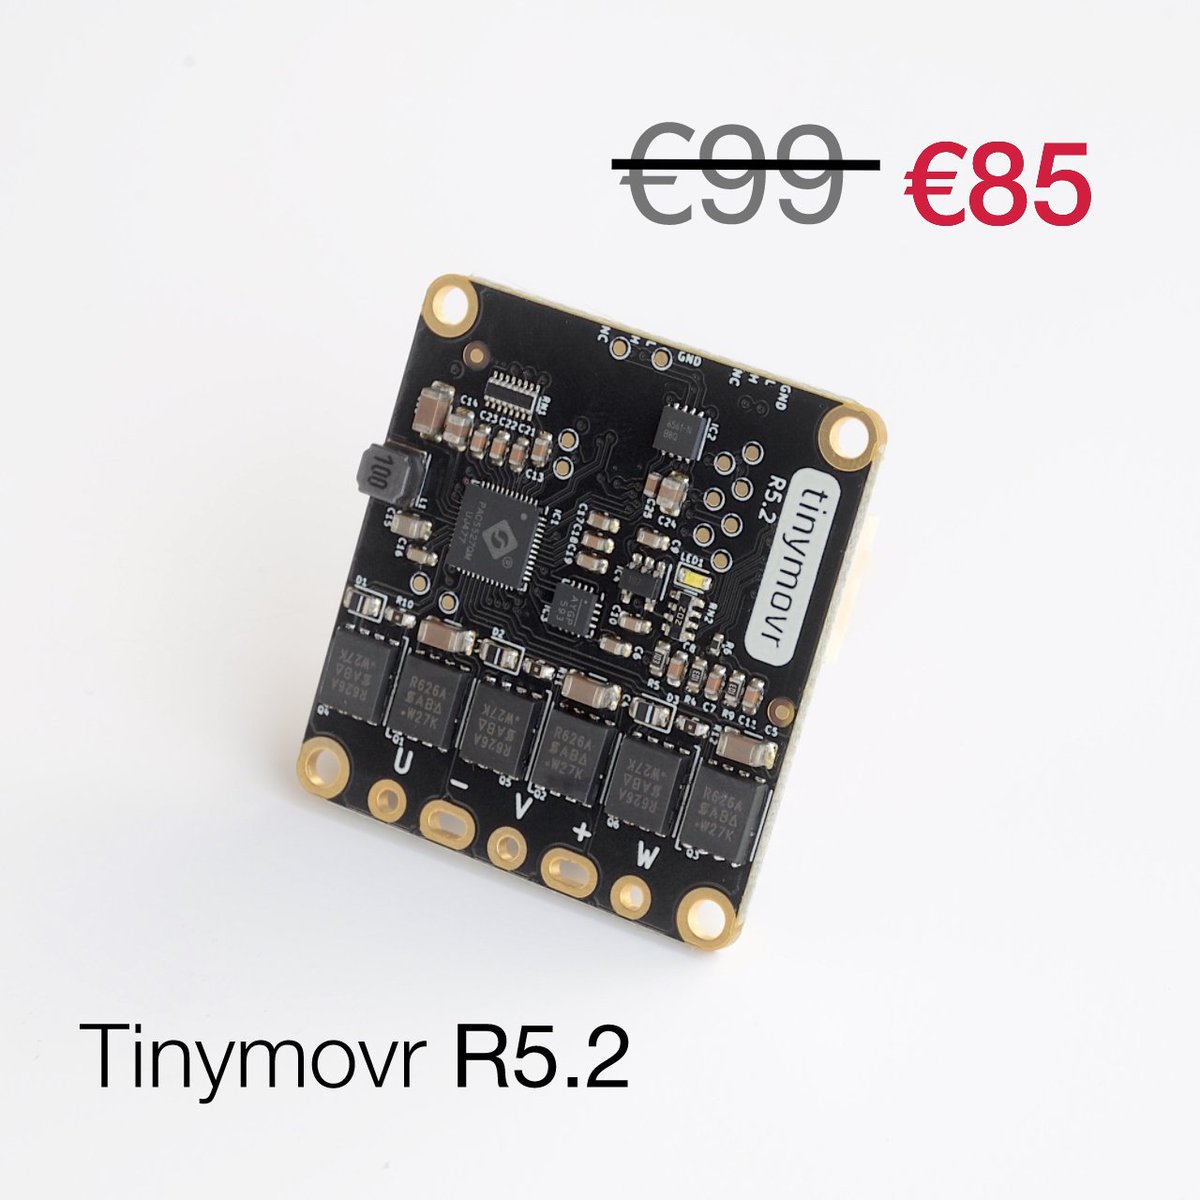 📣 #PriceDrop Alert at #Tinymovr! 🛠️💸 
✅ R5 now €85 
✅ Servo Kit now €169 
✅ Starter Kit €135 
Grab your motion control essentials at tinymovr.com! #Motioncontrol #Robotics #BLDC #PMSM #TechDeals #BuildMore